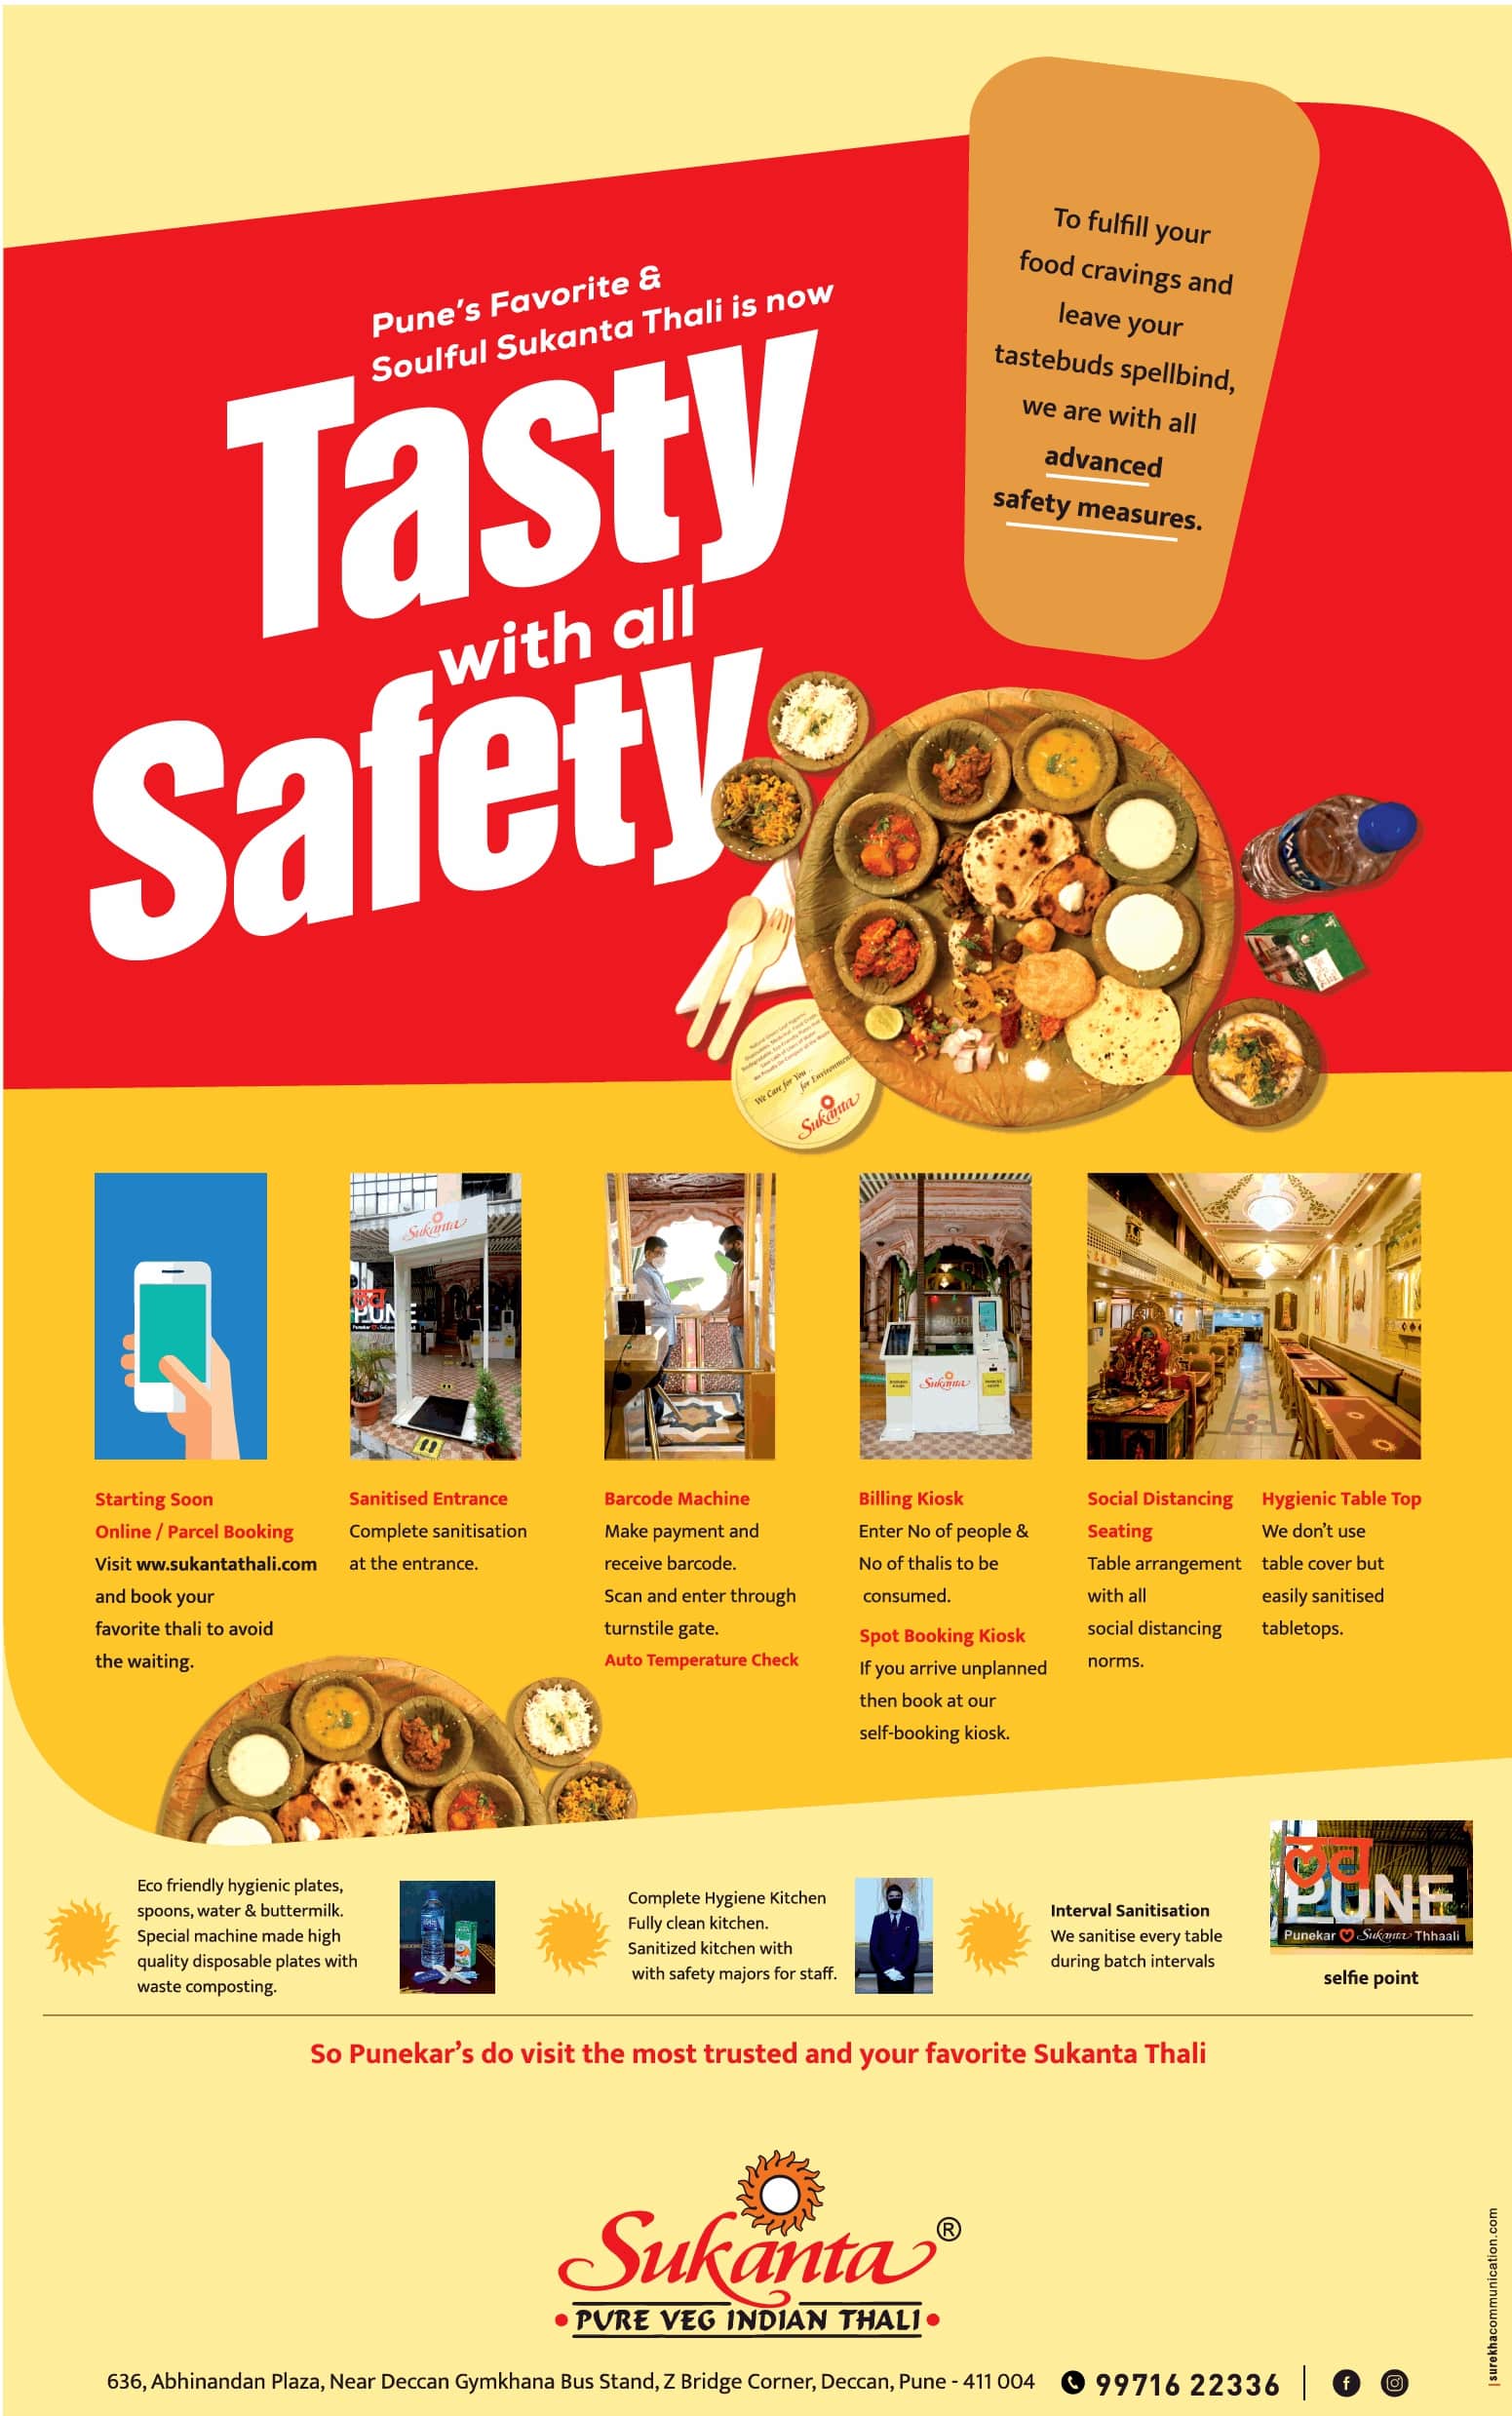 punes-favorite-&-soulful-sukanta-thali-is-now-tasty-with-all-safety-ad-toi-pune-6-11-2020